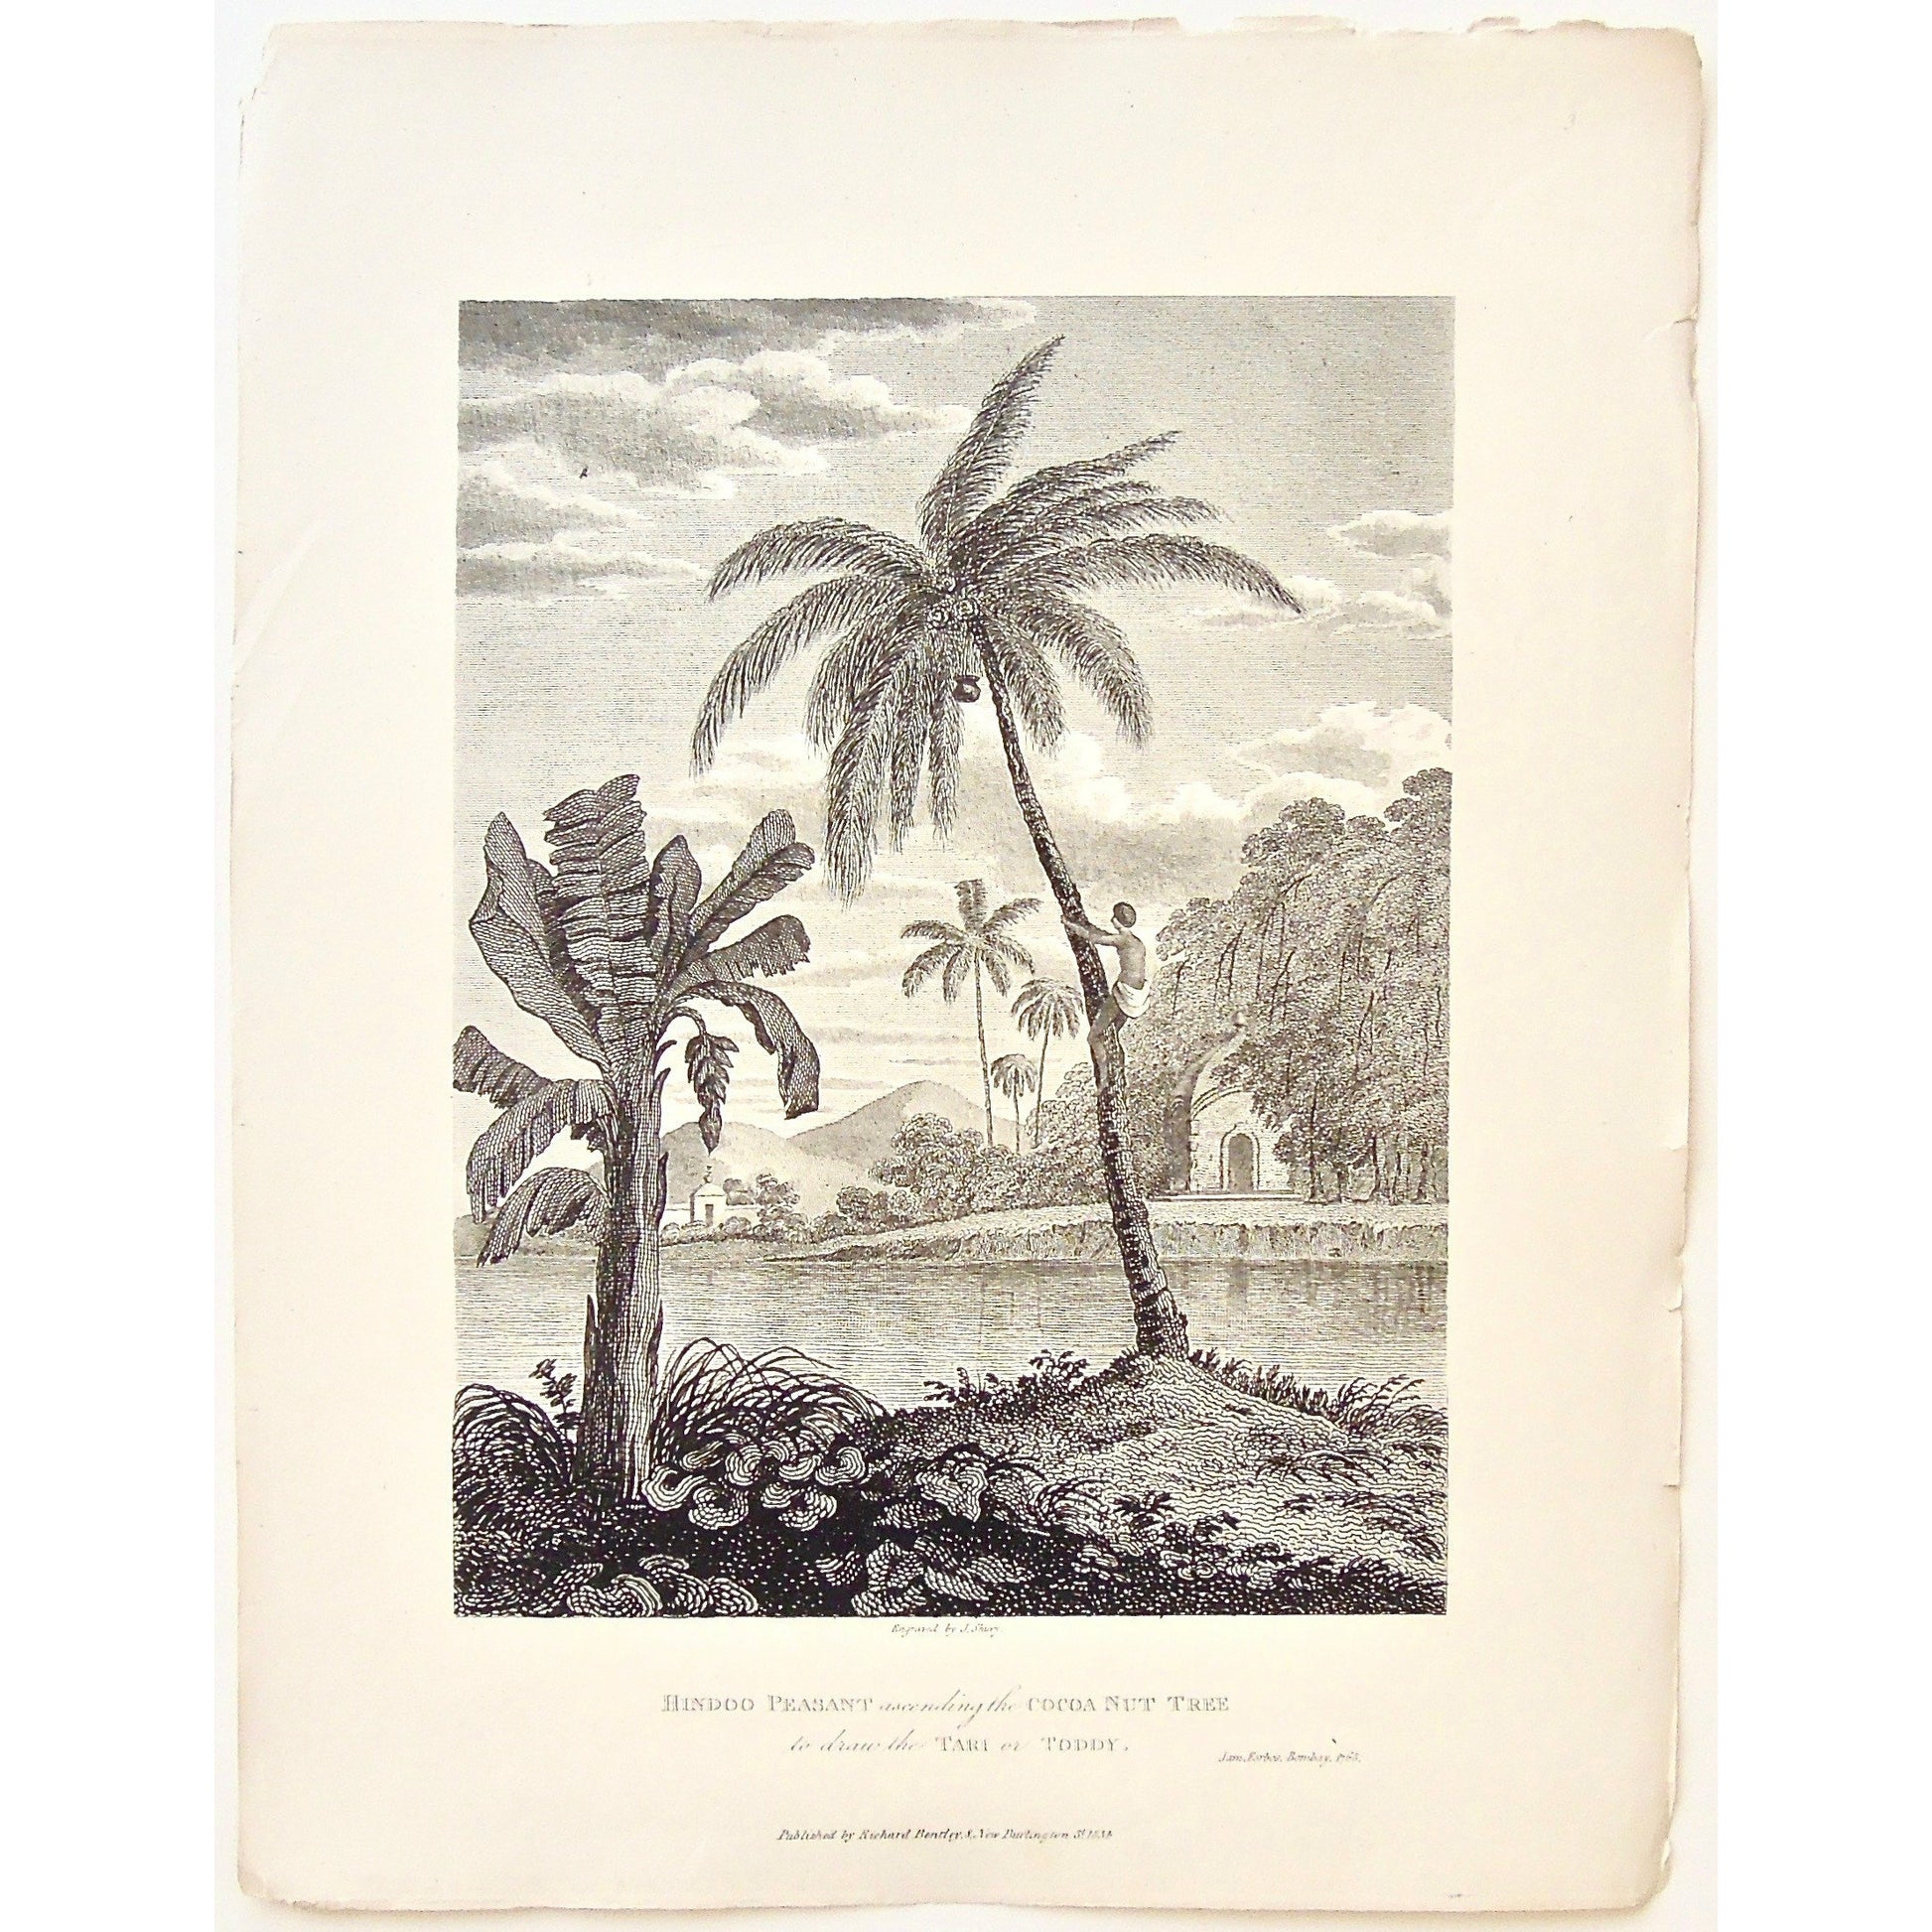 Hindoo Peasant, Hindoo, Hindu Peasant, Hindu, Peasant, ascending a cocoa nut tree, Ascending a Palm Tree, Cocoa Nut Tree, coconut tree, palm Trees, Drawing the Tari, Drawing the Toddy, Tari, Toddy, climbing a tree, by the water, India, Indian, Indian trees, James Forbes, Forbes, Eliza Rosée, Countess De Montalembert, Oriental Memoirs, Narrative of Seventeen Years Residence in India, Bentley, 8 New Burlington Street, London, Shury, Nichols & Son, 25 Parliament Street, 1768, 1834, Antique Print, Antique, Pri